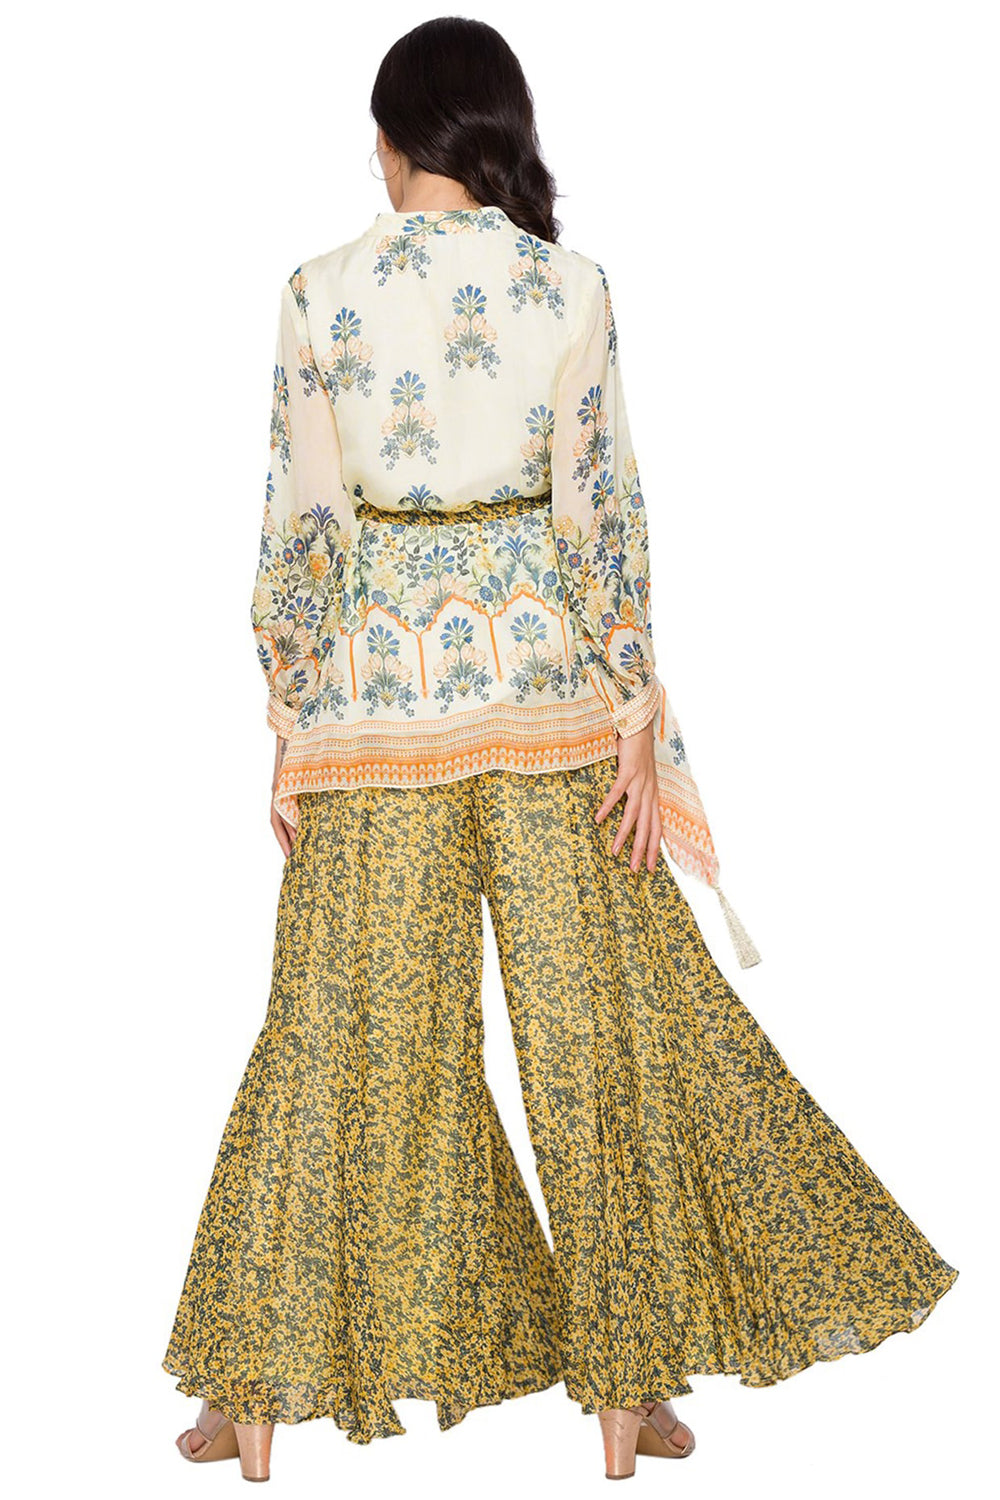 Eden Printed Asymetrical Top Paired With Sharara Pants And Printed Belt Embellished With Pearls